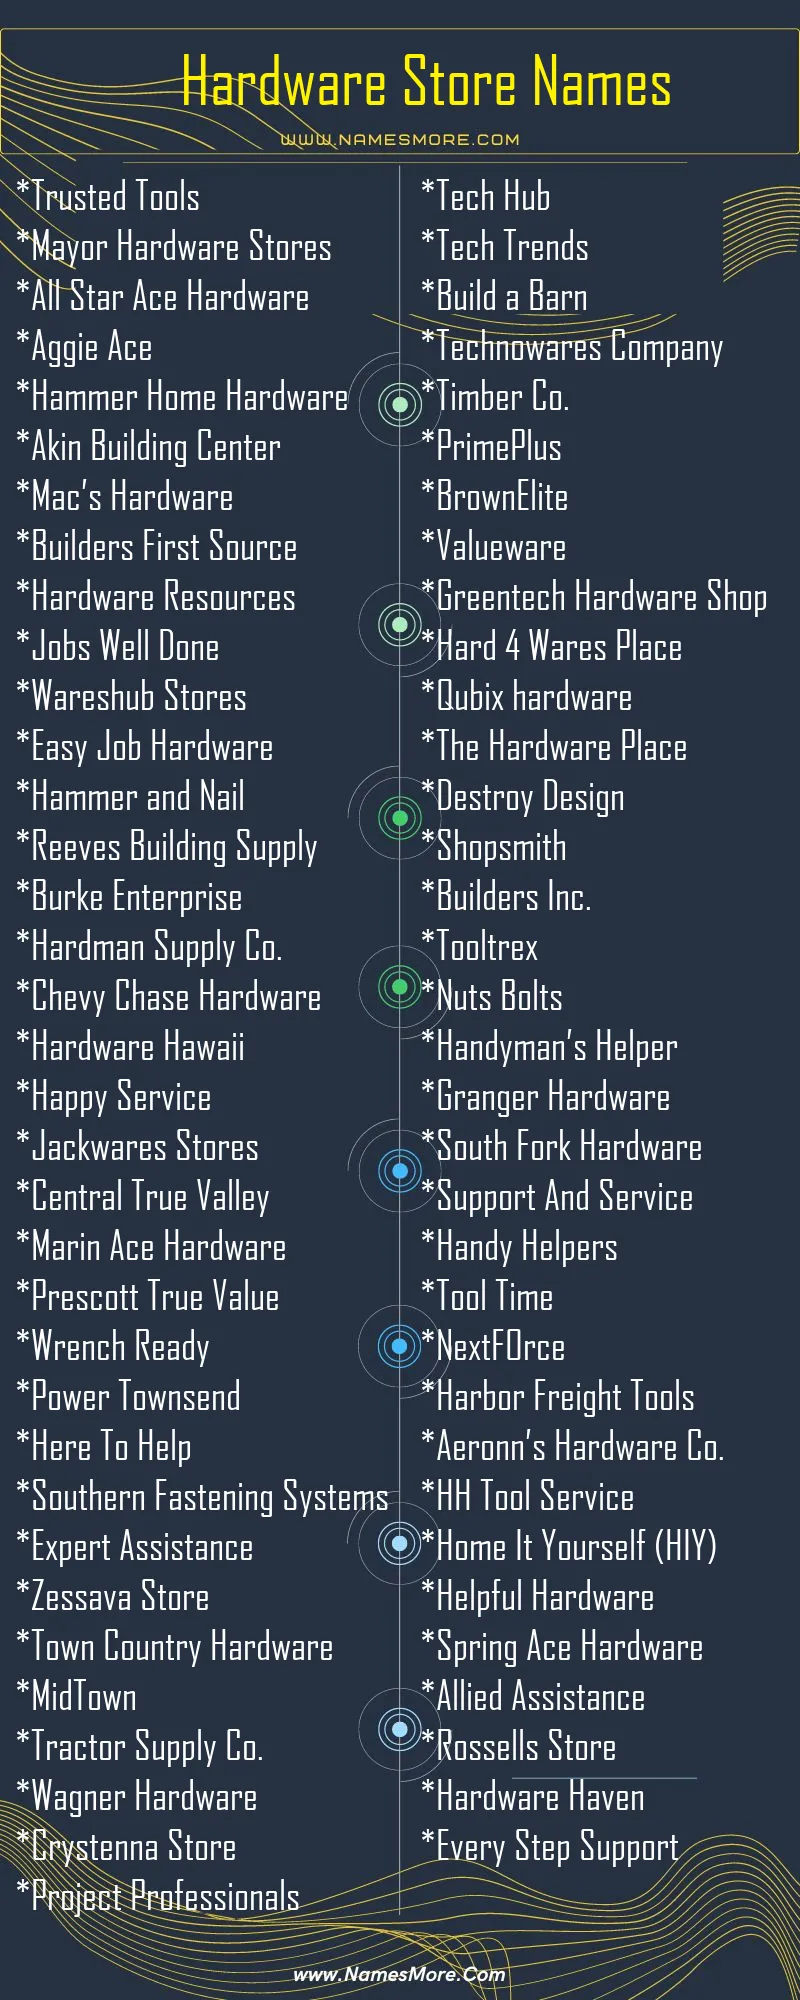 Hardware Store Names List Infographic